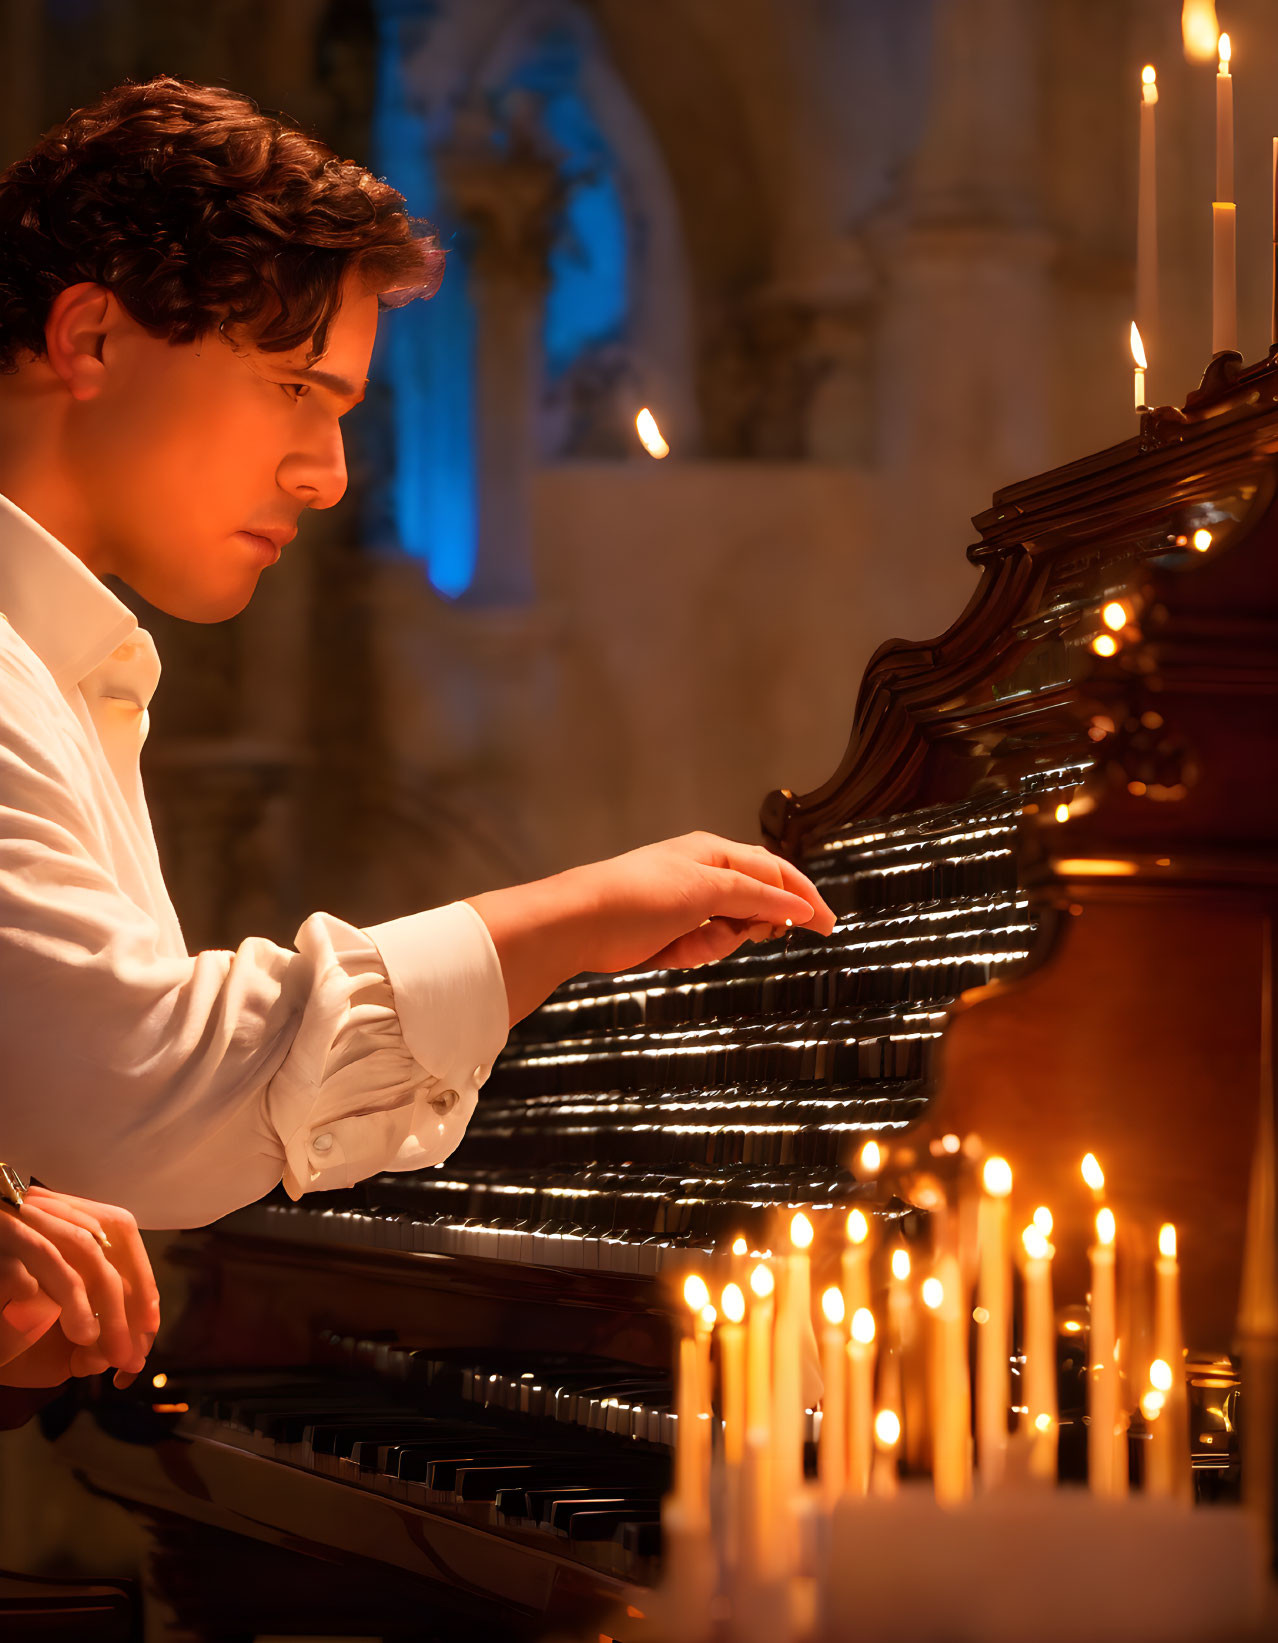 Young man playing grand piano in candlelit room with classical architecture